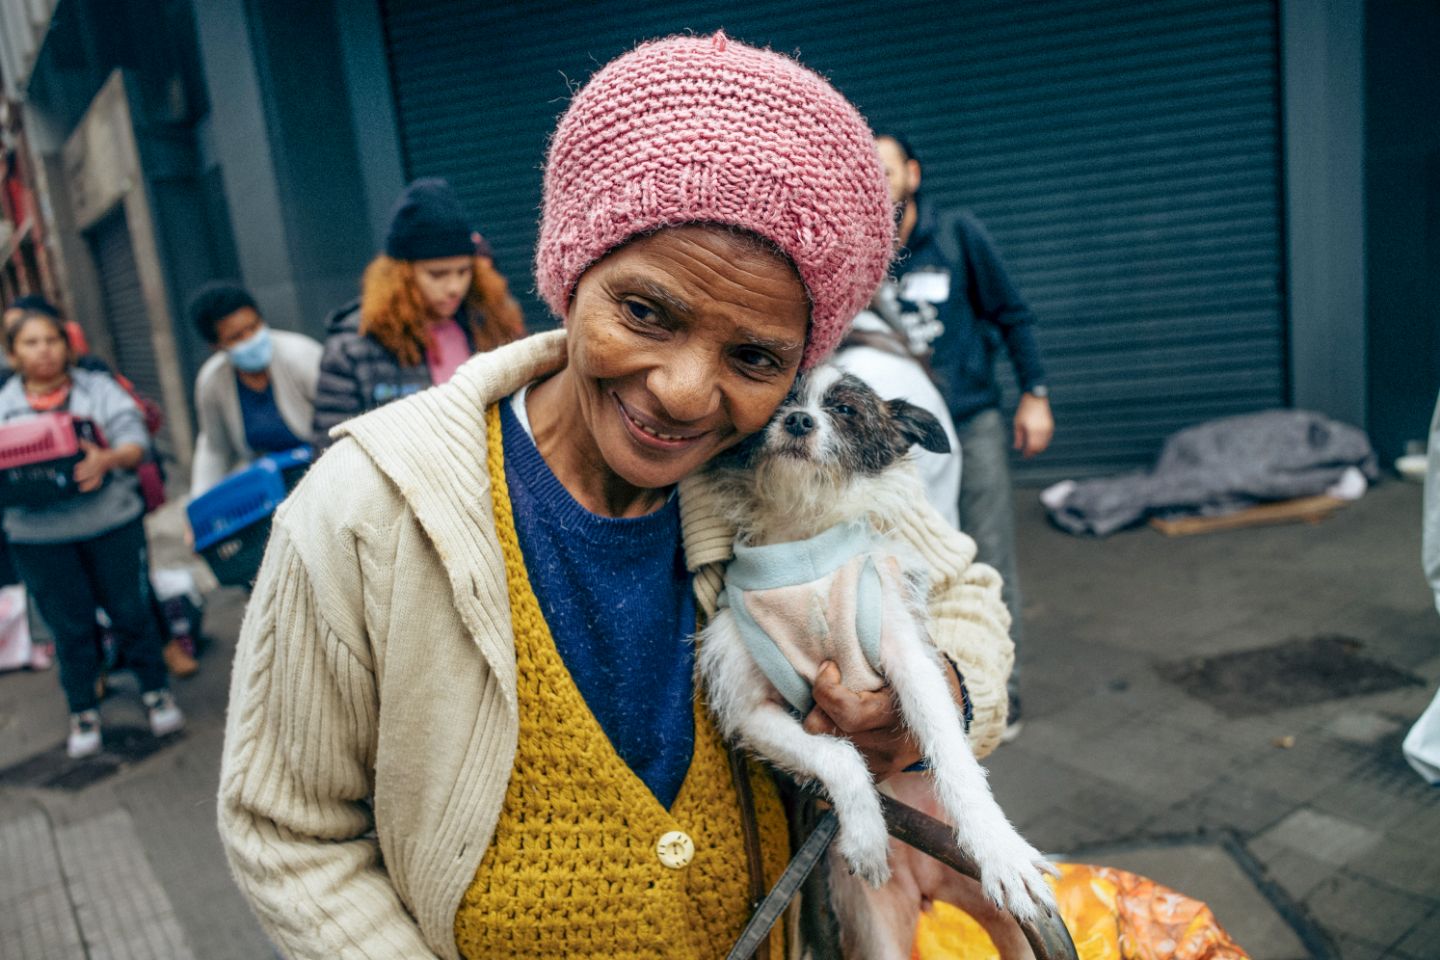 Woman with a puppy